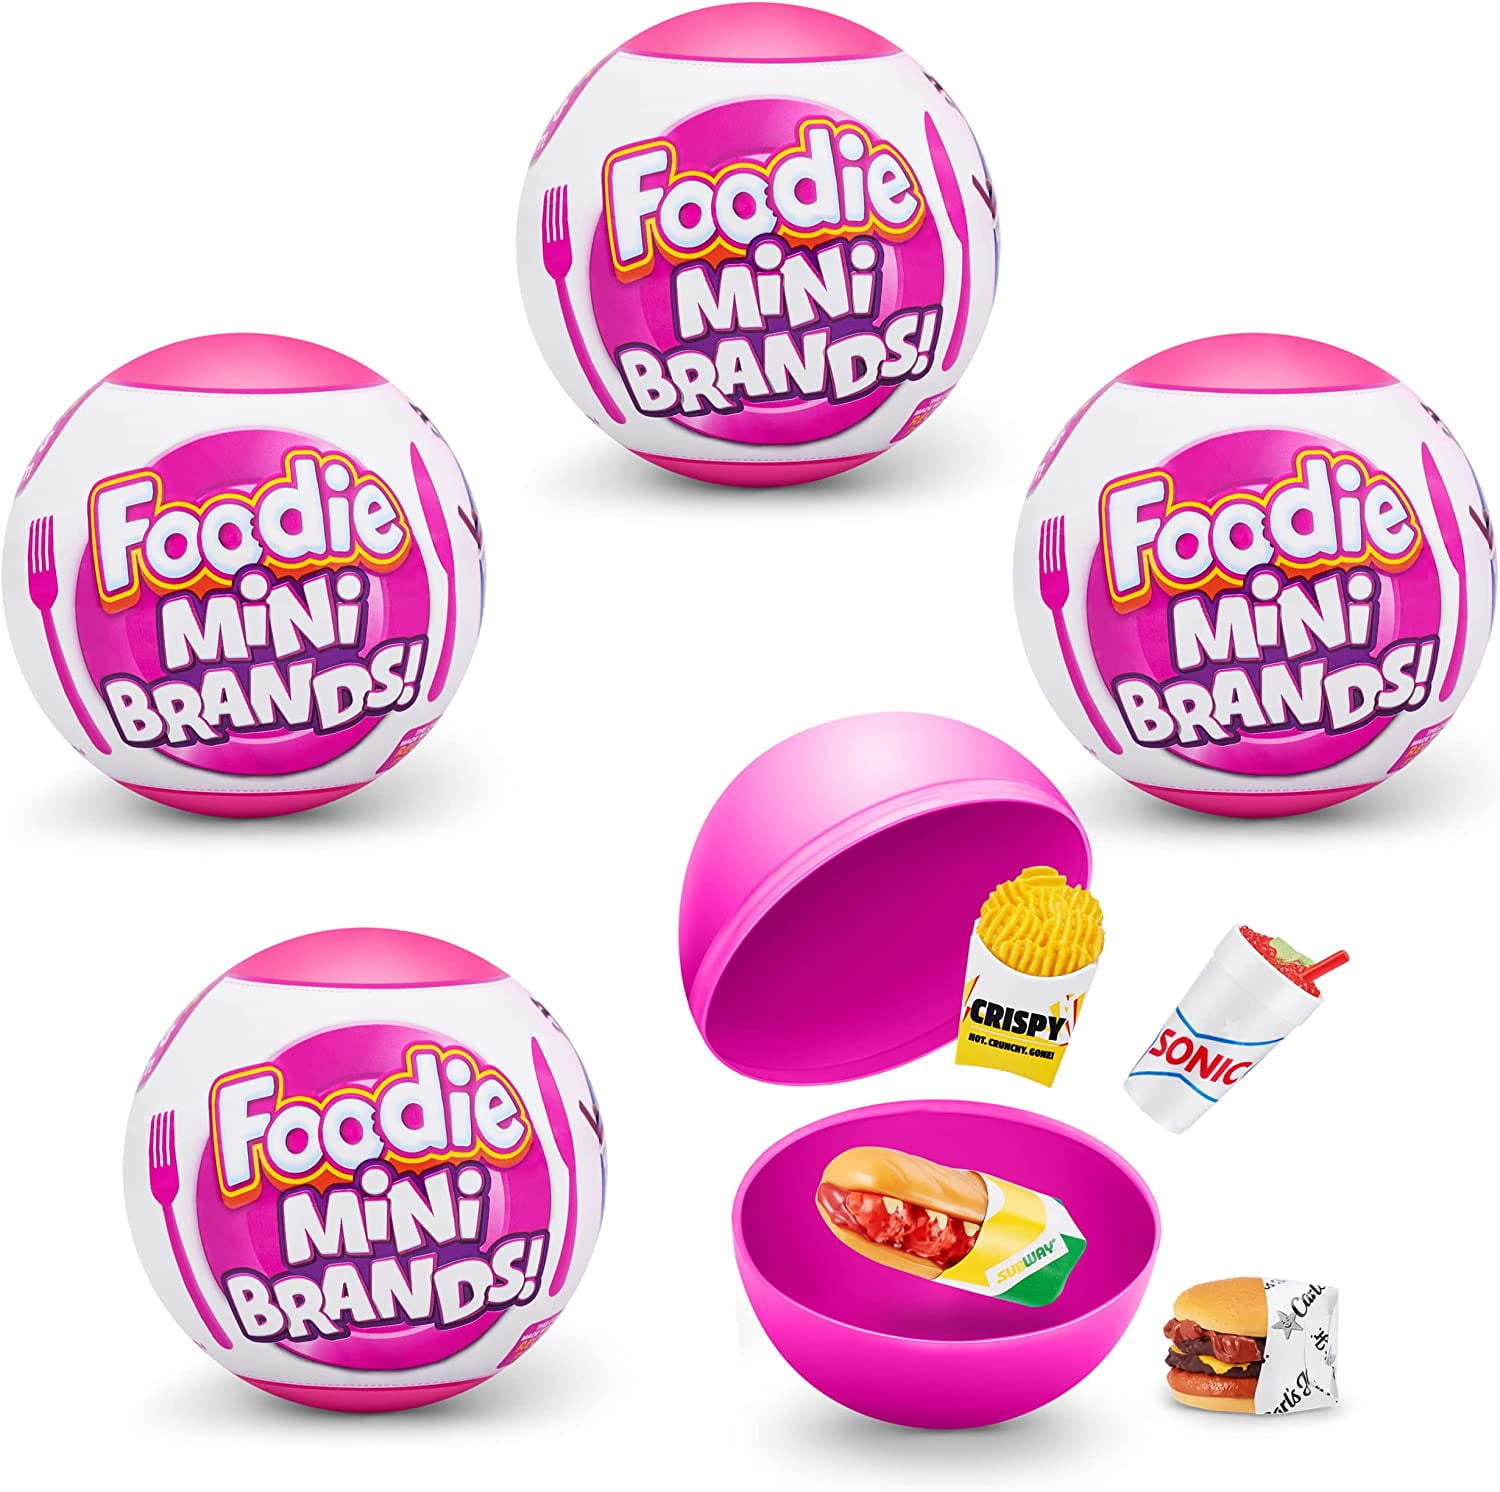  5 Surprise Mini Brands Ultimate Collector's Guide (4 Pack)  #cheesetastic, sweettreats, spoilyourself, stockup with 2 Gosutoys Stickers  : Toys & Games